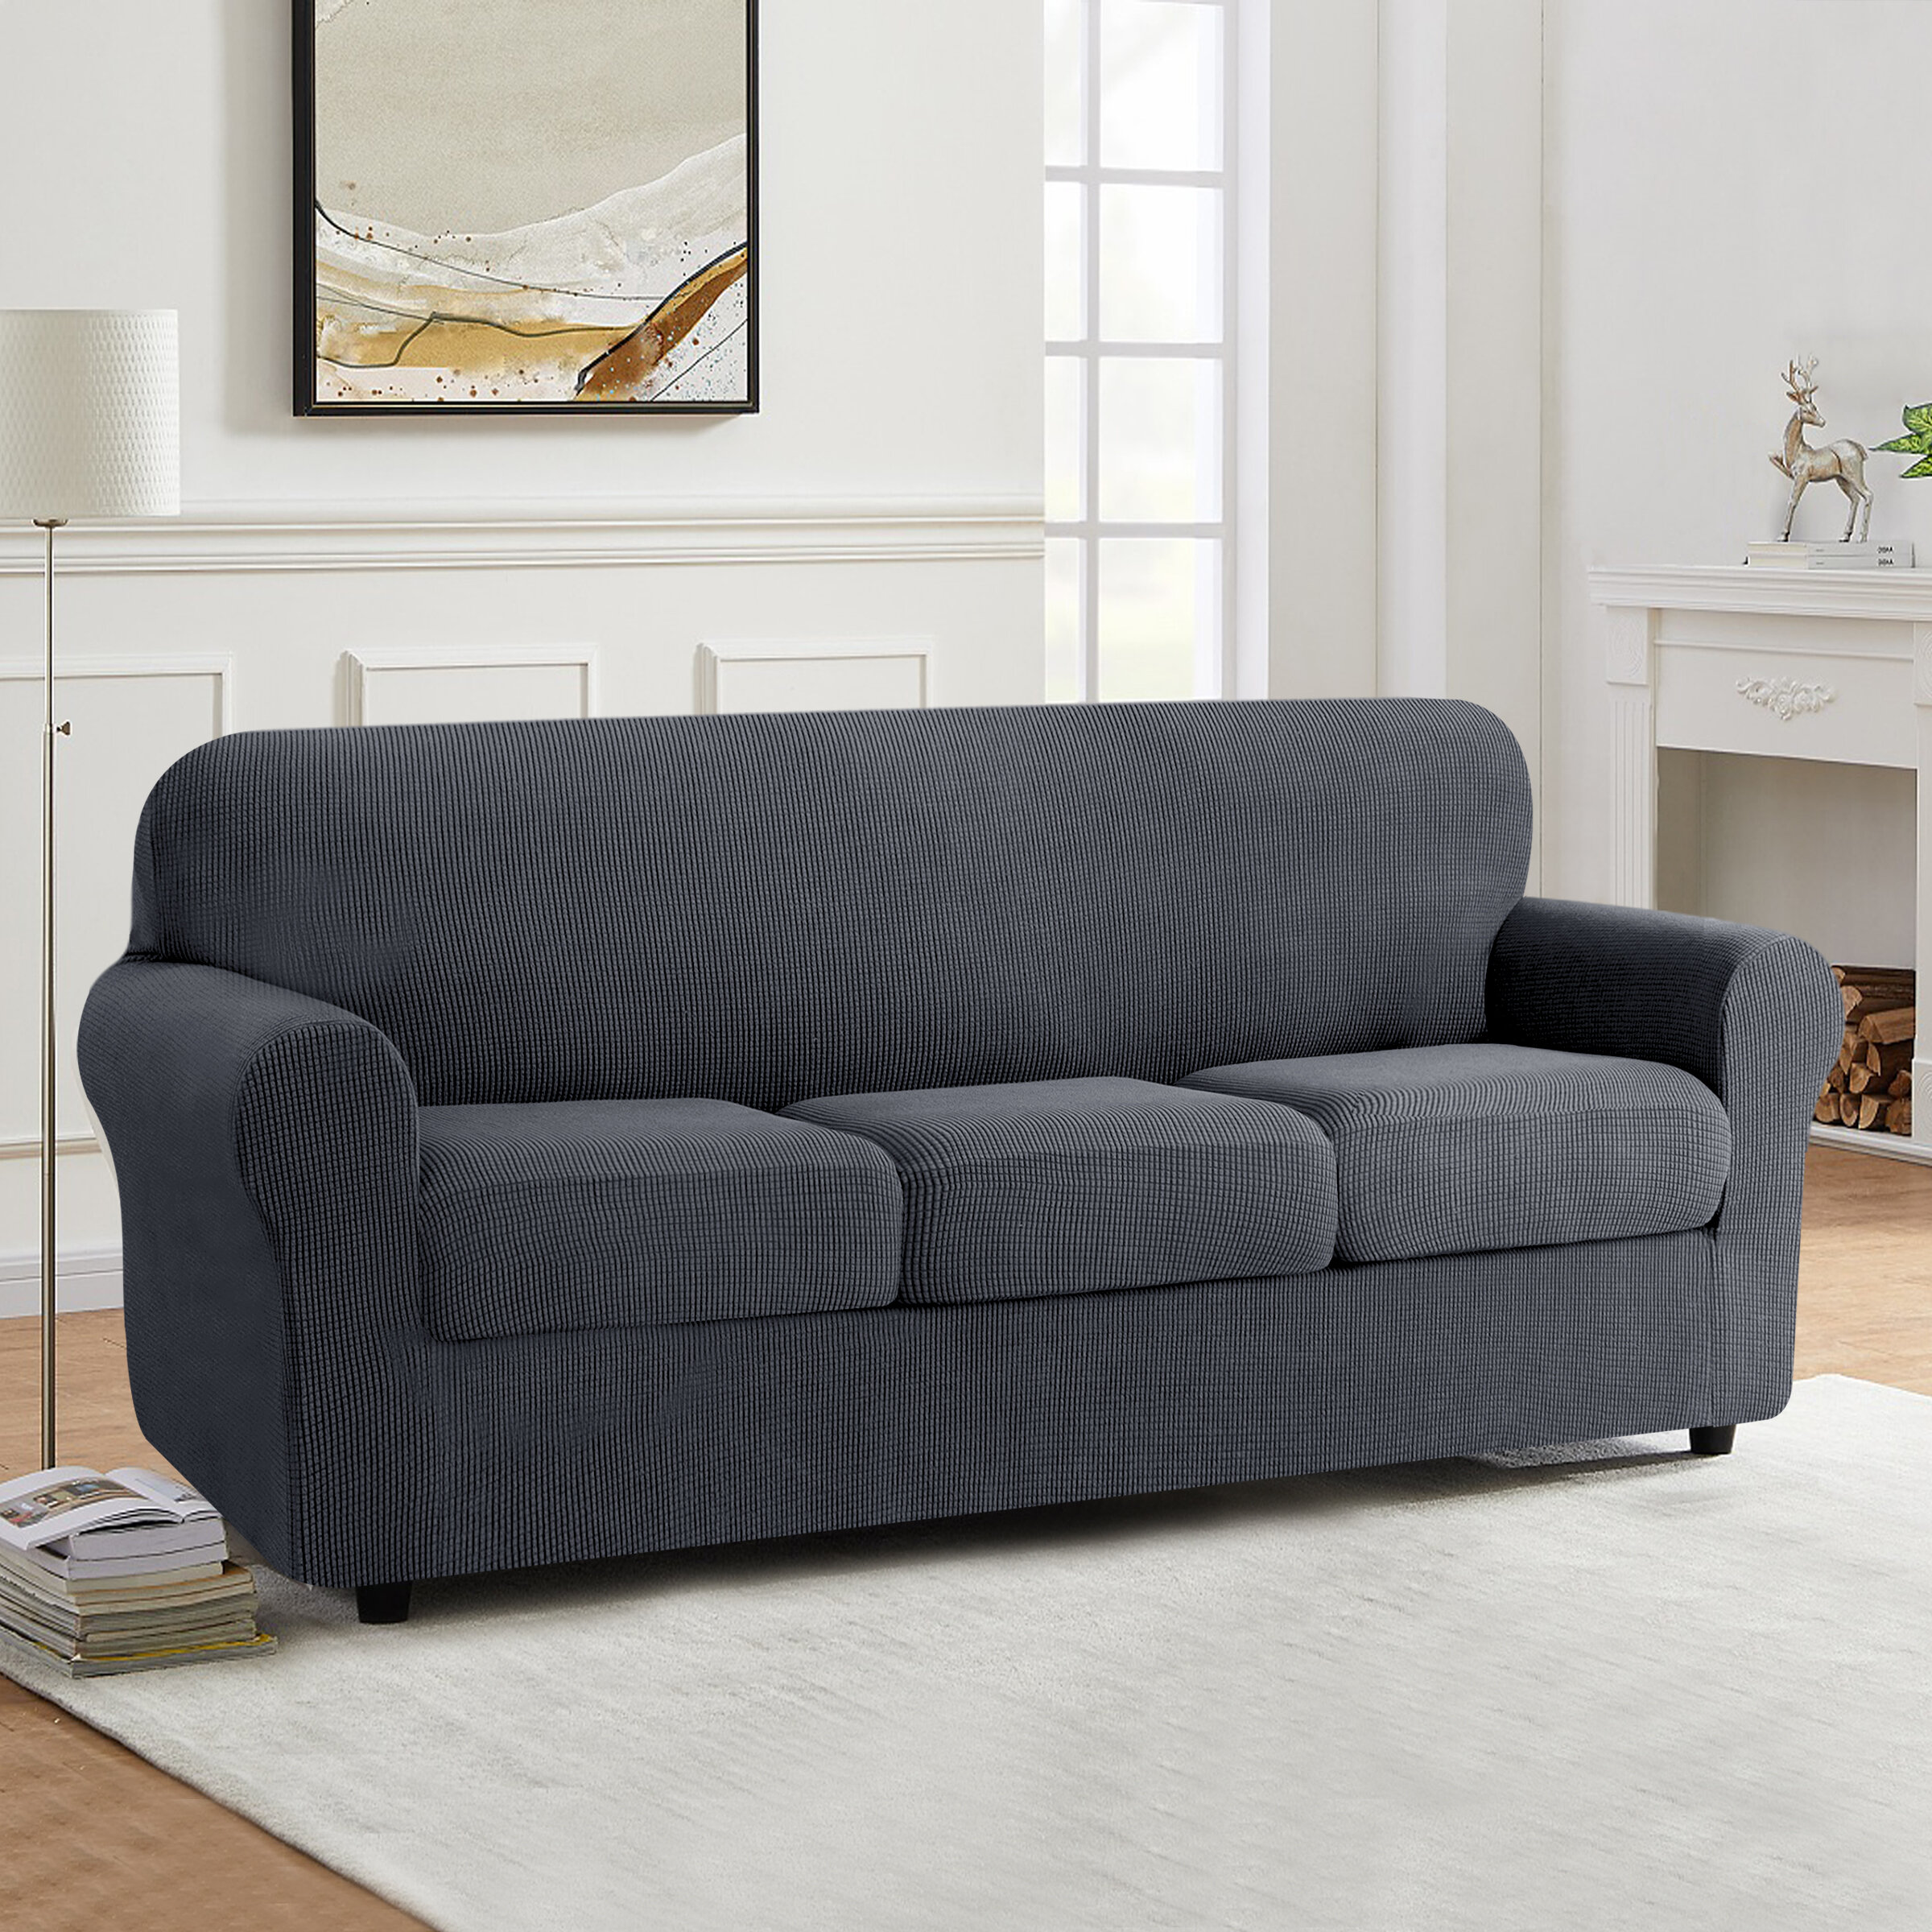 How to Clean & Sanitize Couch Slipcovers, Cushions and Throw Pillows